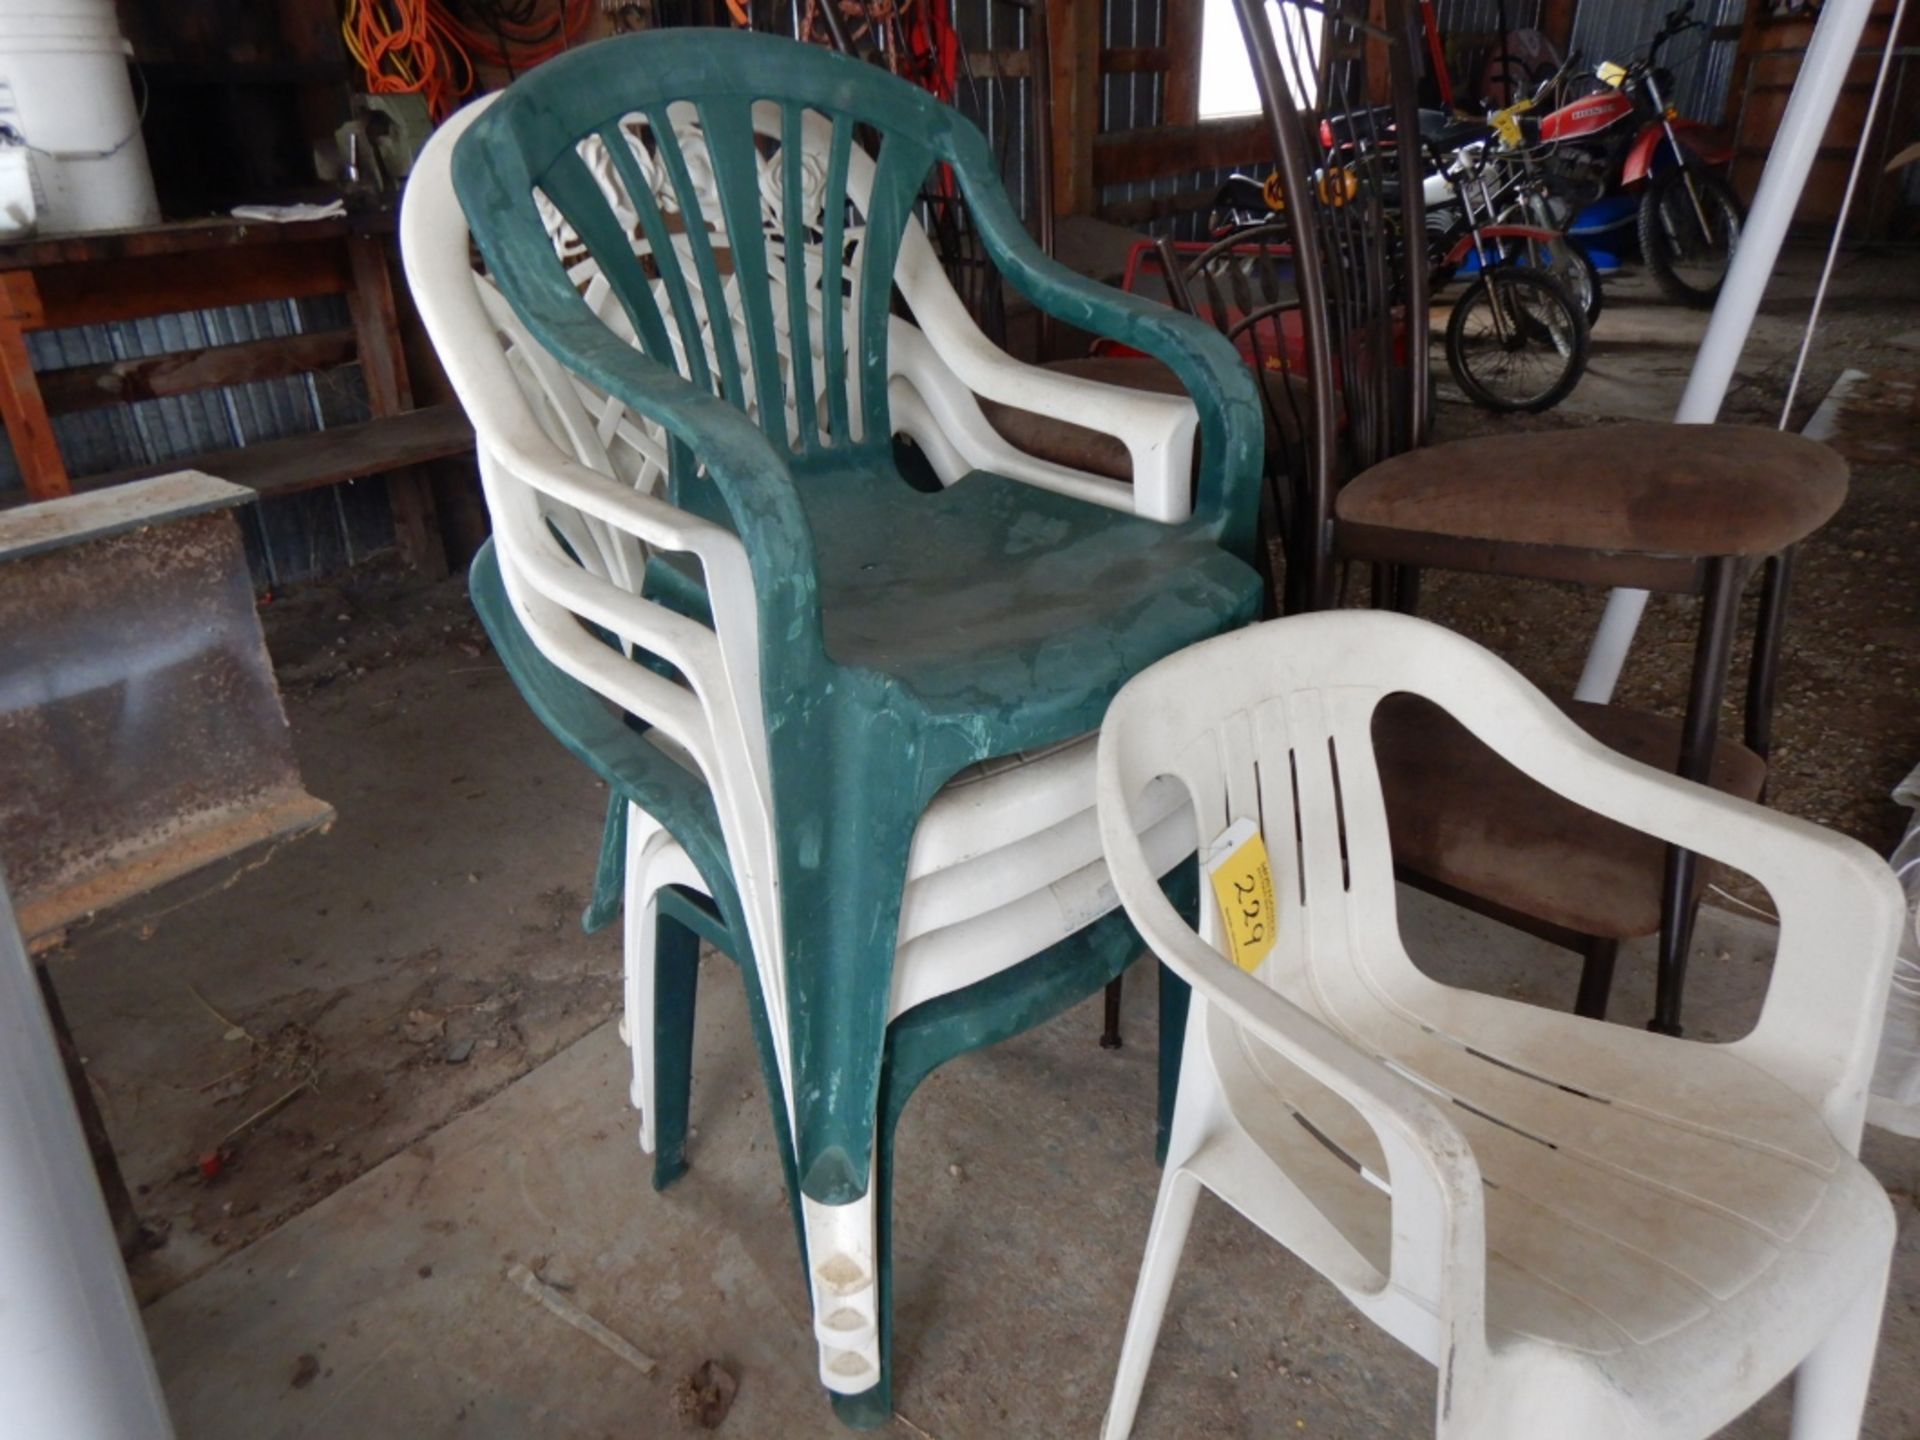 L/O ASSORTED POLY LAWN CHAIRS AND METAL FRAMED CHAIRS - Image 3 of 3